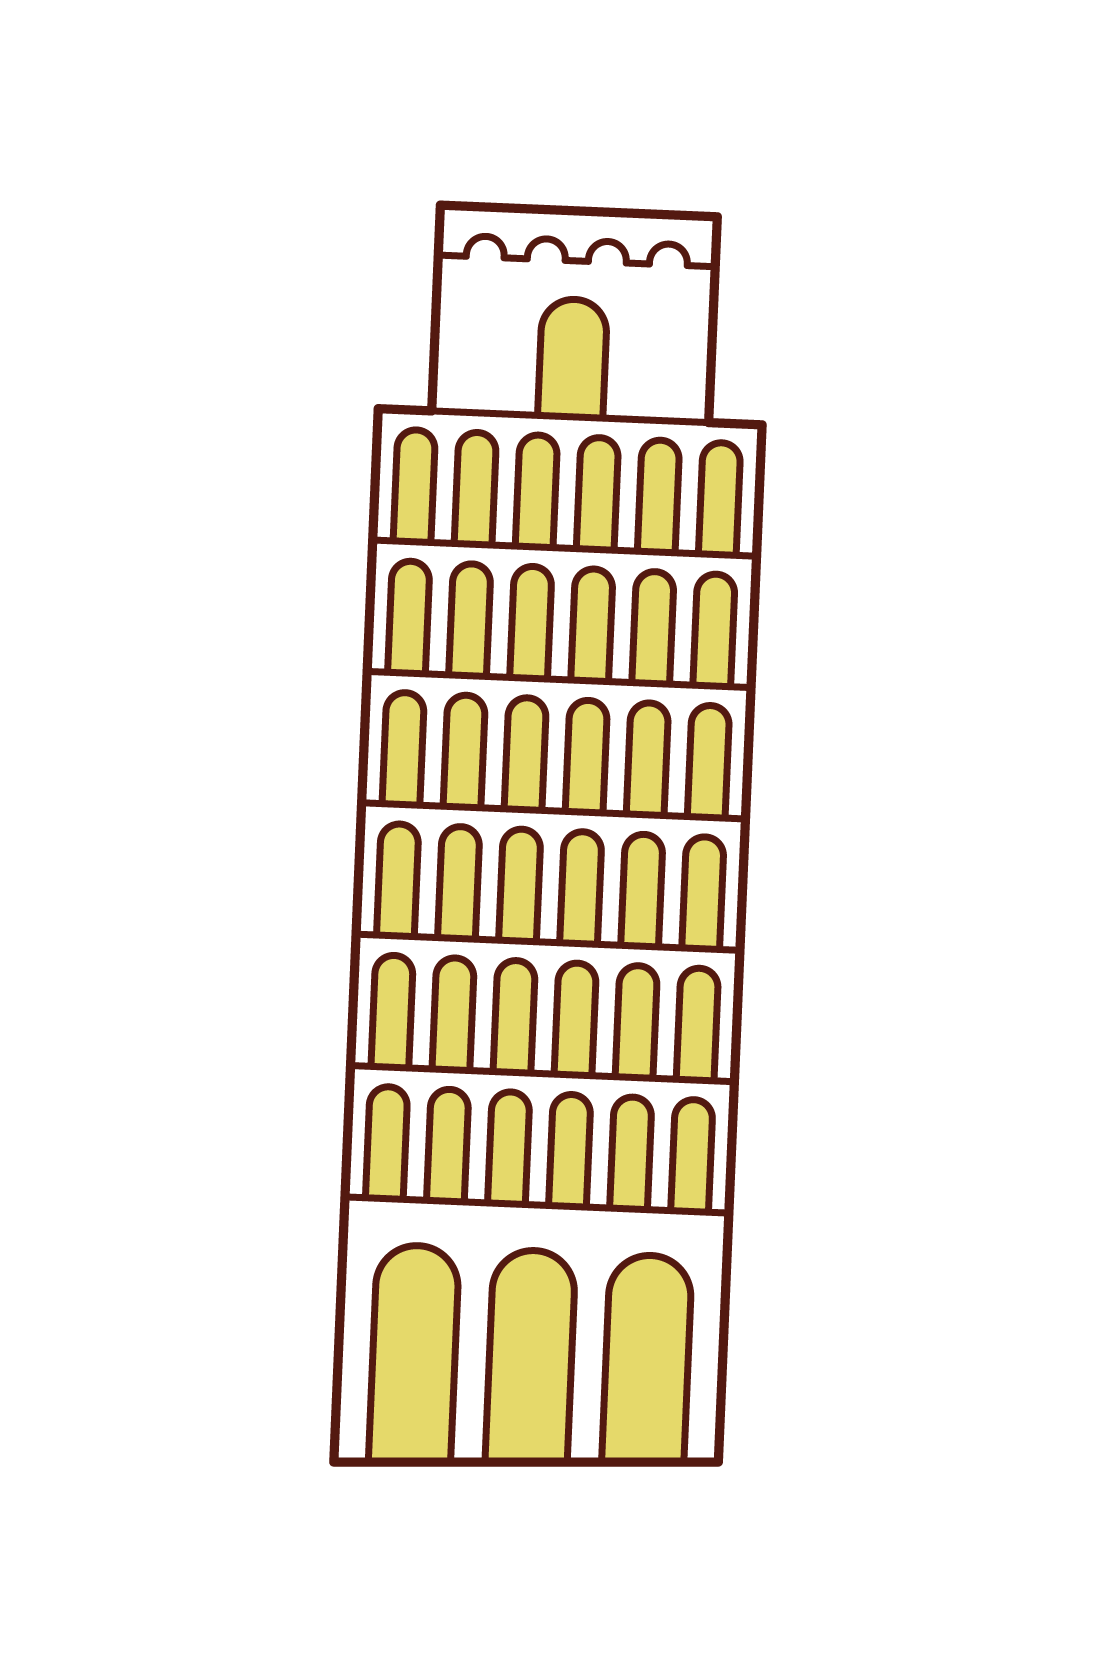 Illustration of the Leaning Tower of Pisa